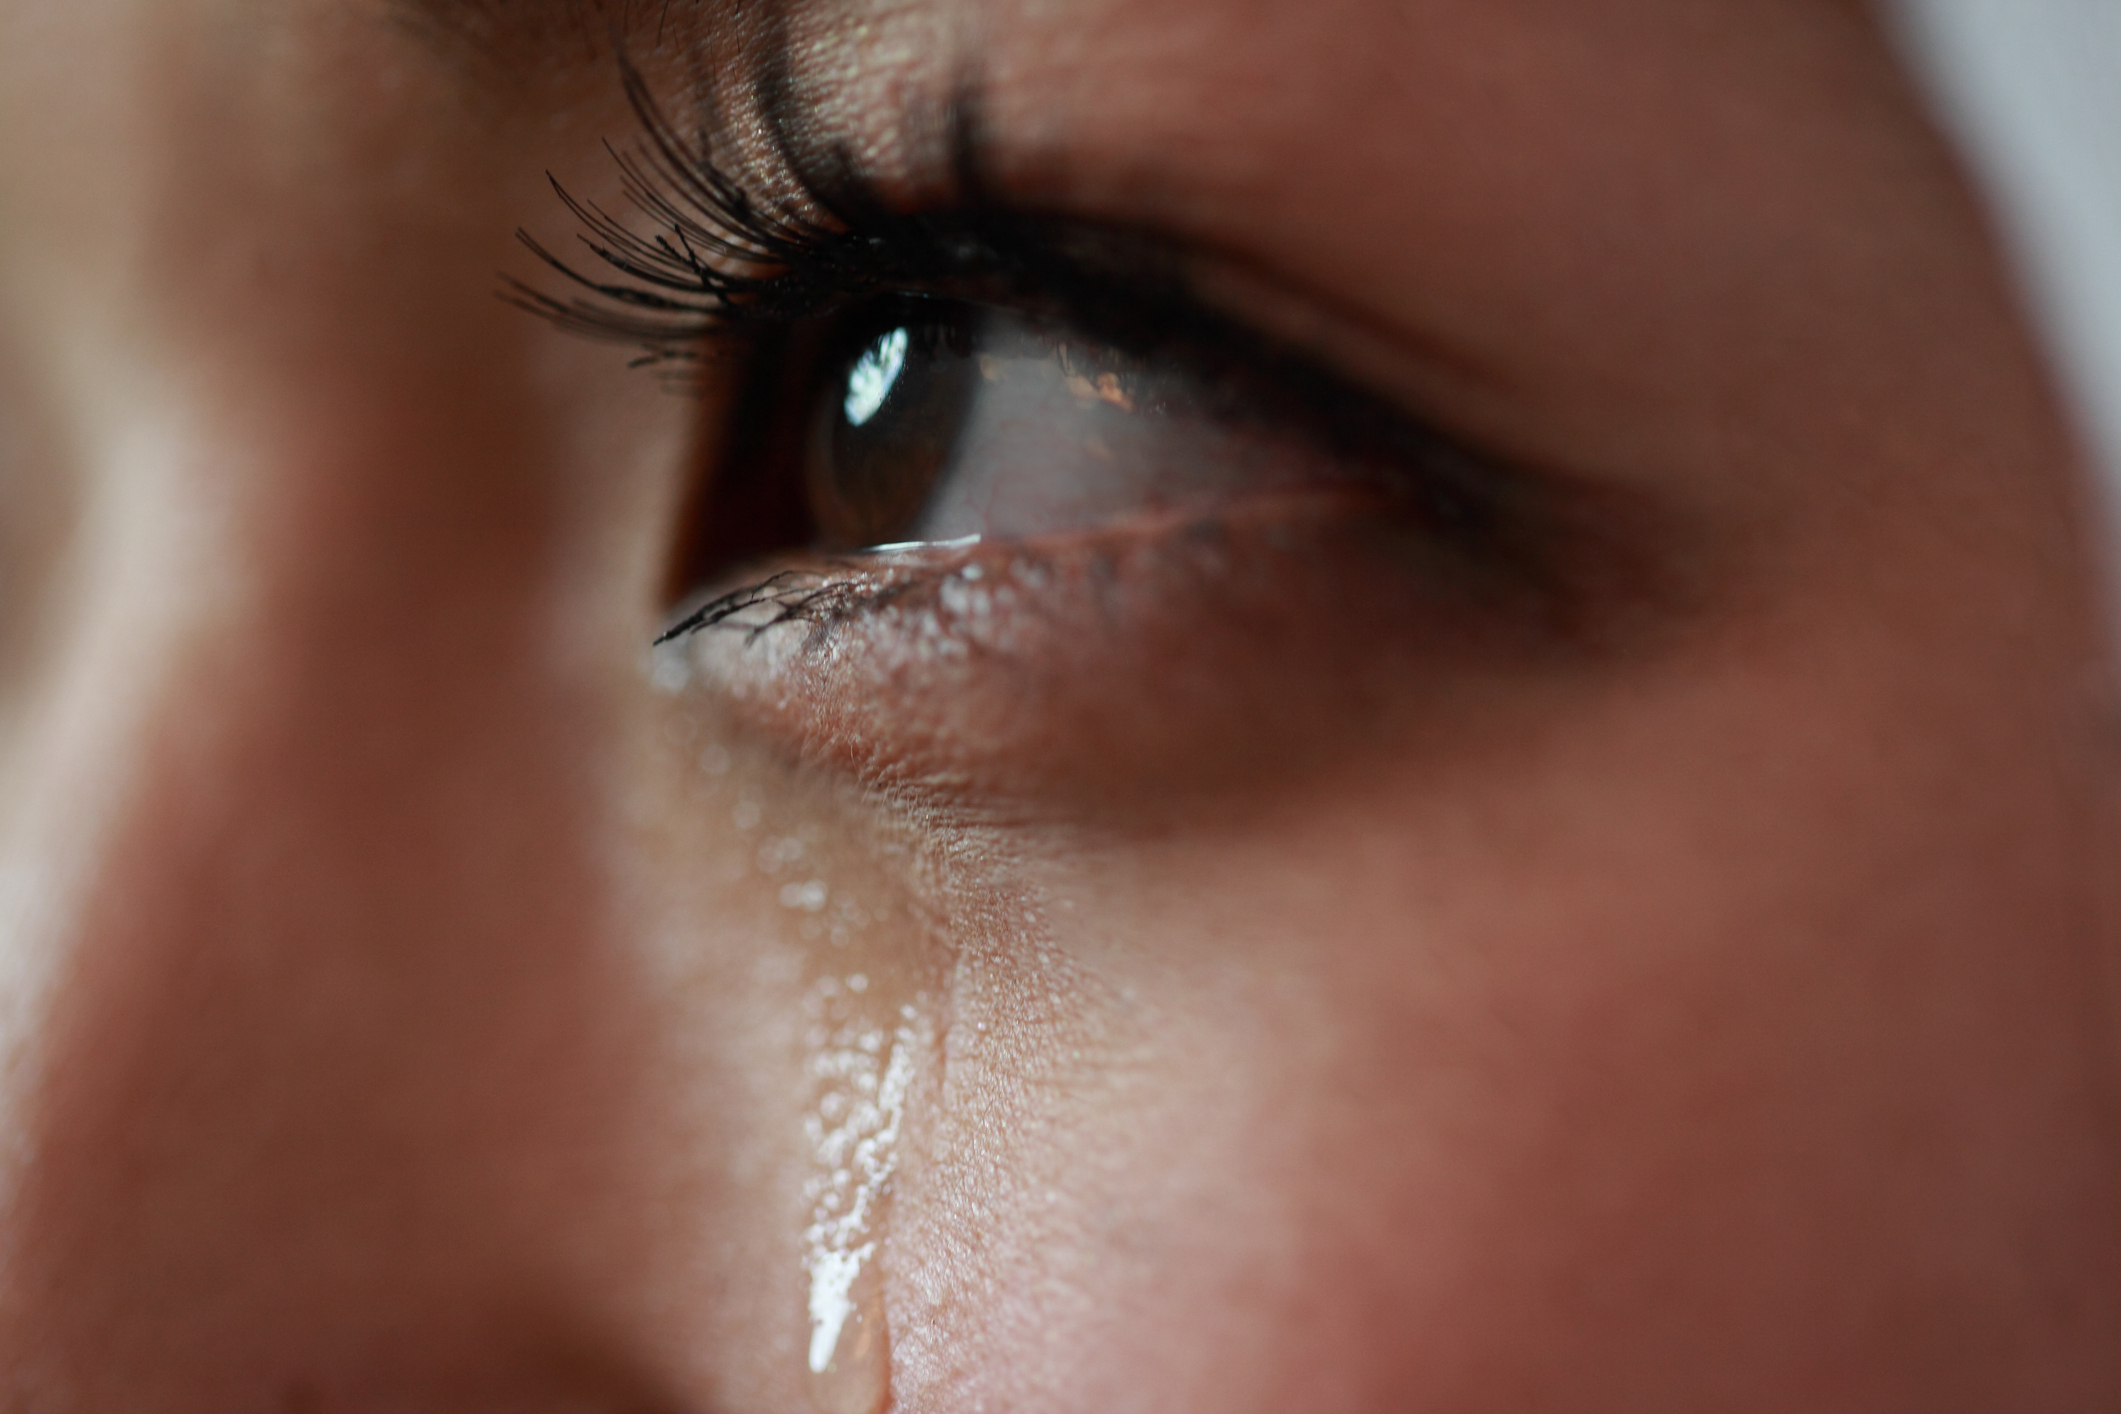 Why classical music can make you cry, according to various theories